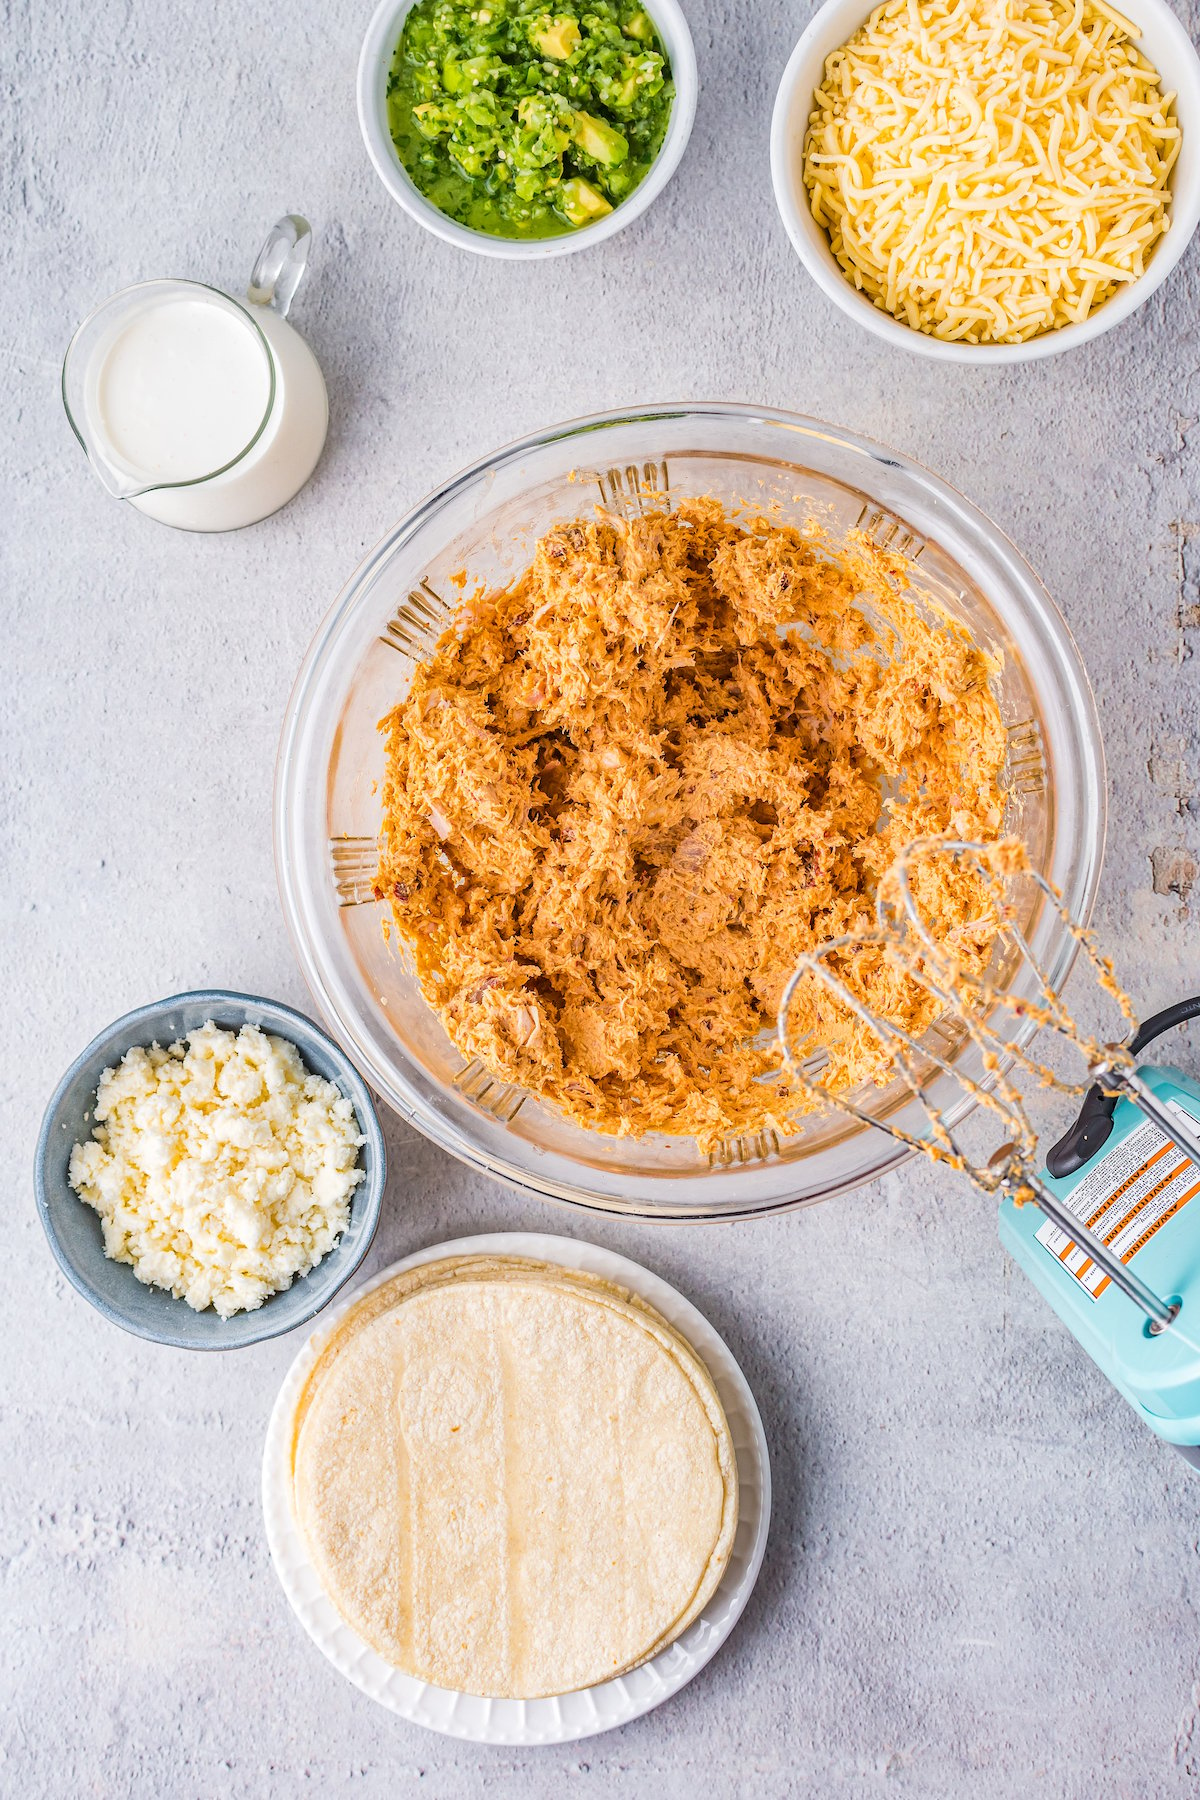 Dishes of crema, guacamole, shredded cheese, cotija cheese crumbles, and tortillas are arranged around a large mixing bowl of creamy chicken filling.